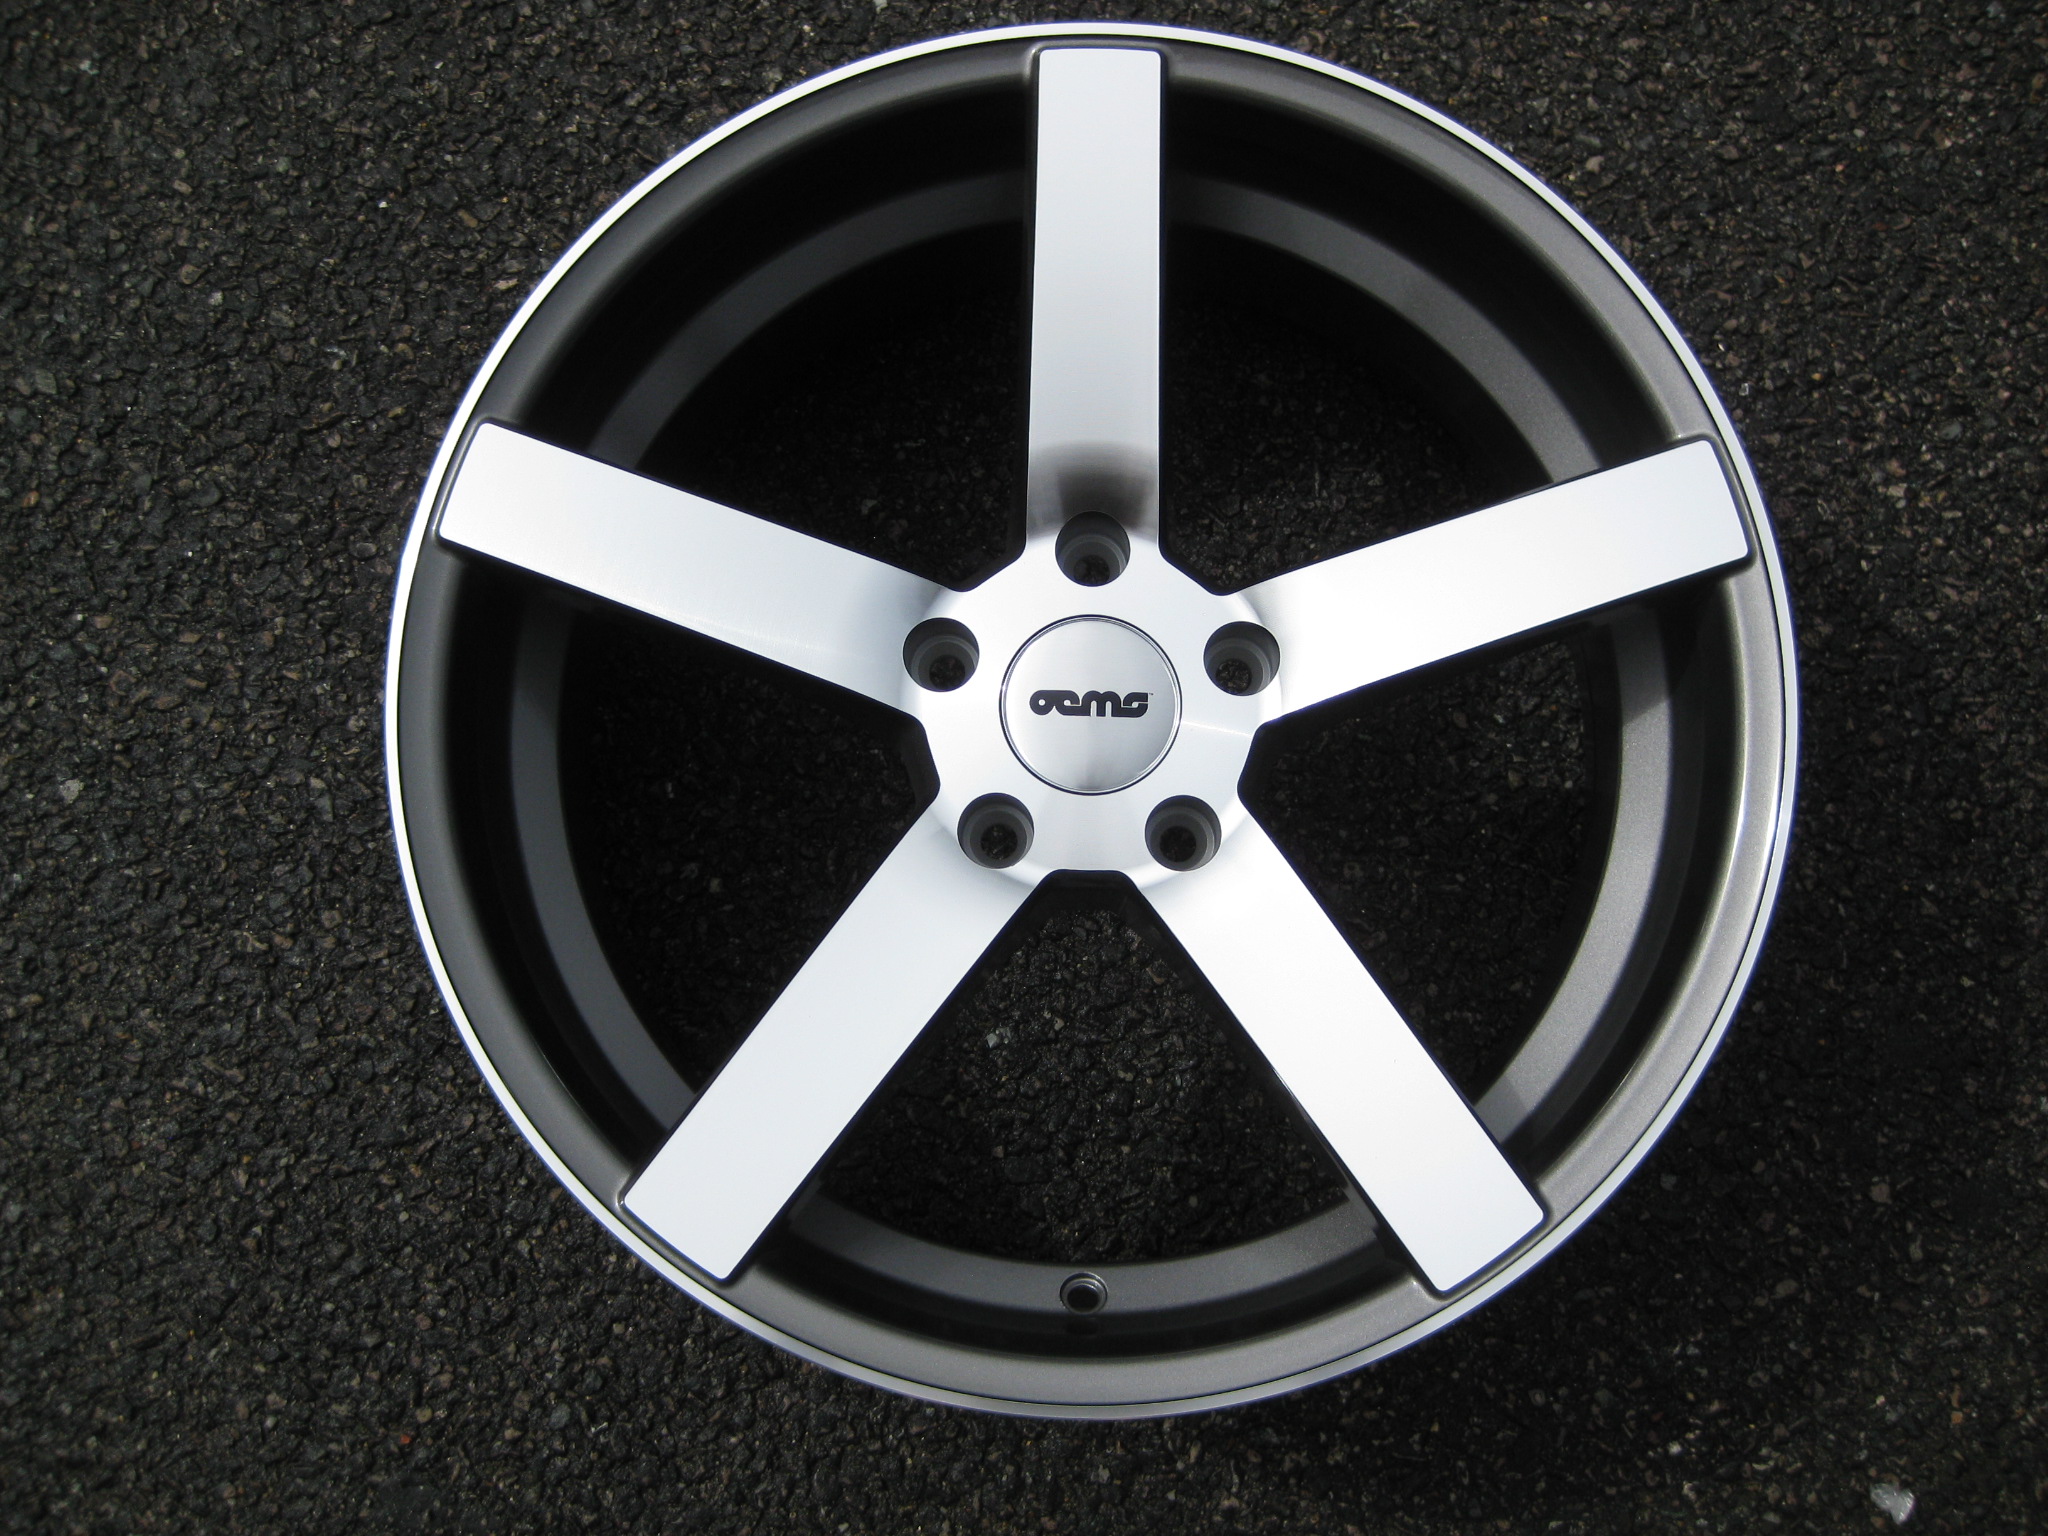 NEW 19" OEMS 115 DEEP CONCAVE ALLOY WHEELS IN GUNMETAL WITH POLISHED FACE WIDER 9.5" ALL ROUND